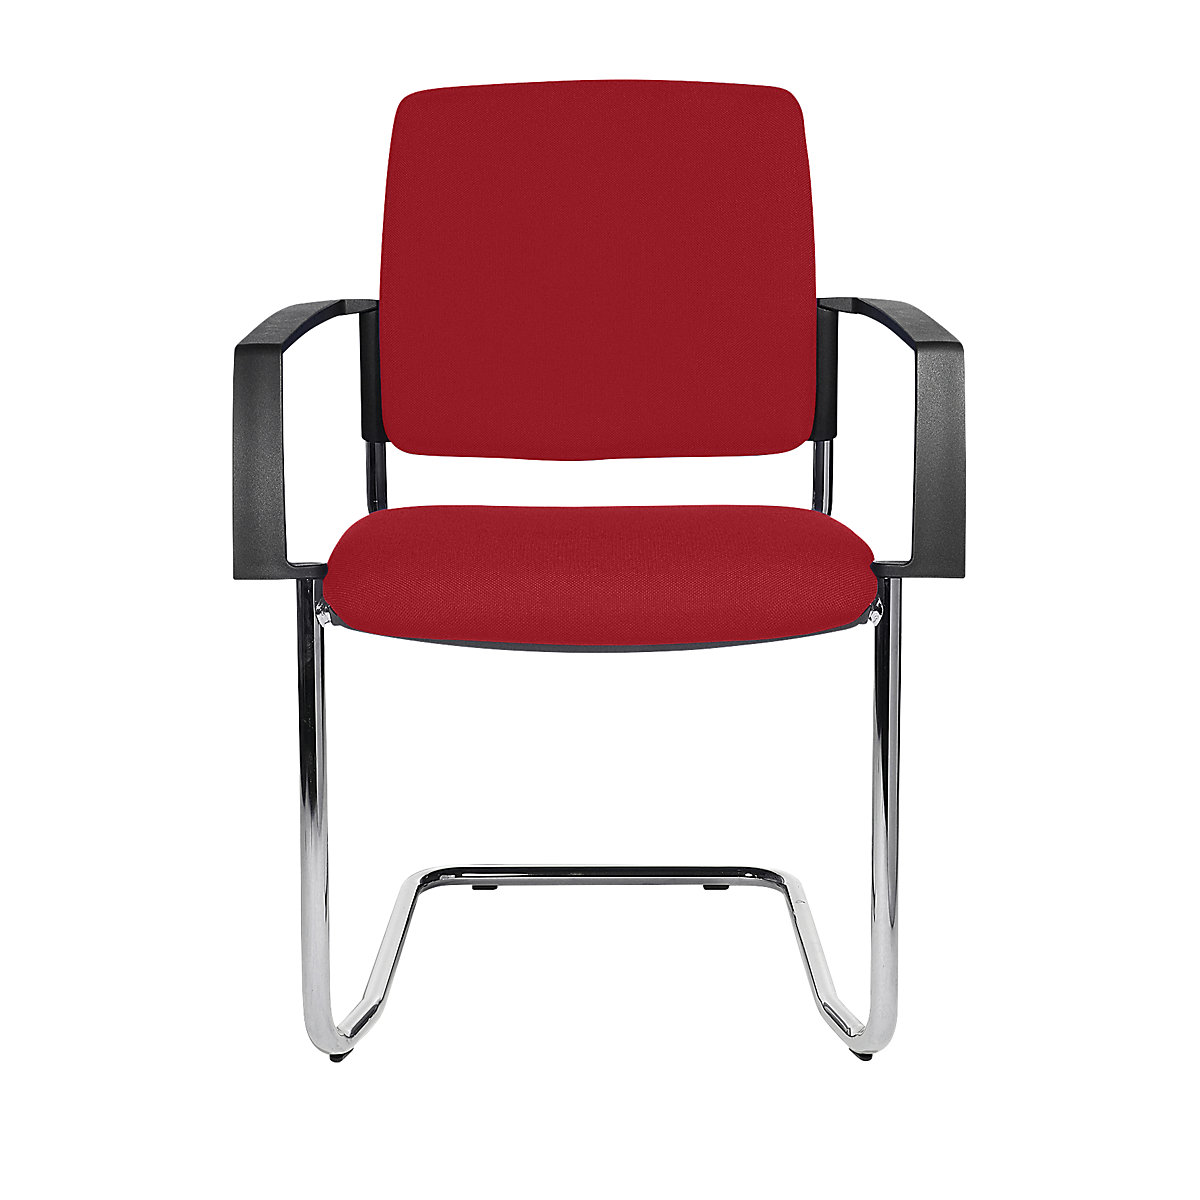 Padded stacking chair – Topstar, cantilever chair, pack of 2, chrome plated frame, red upholstery-4